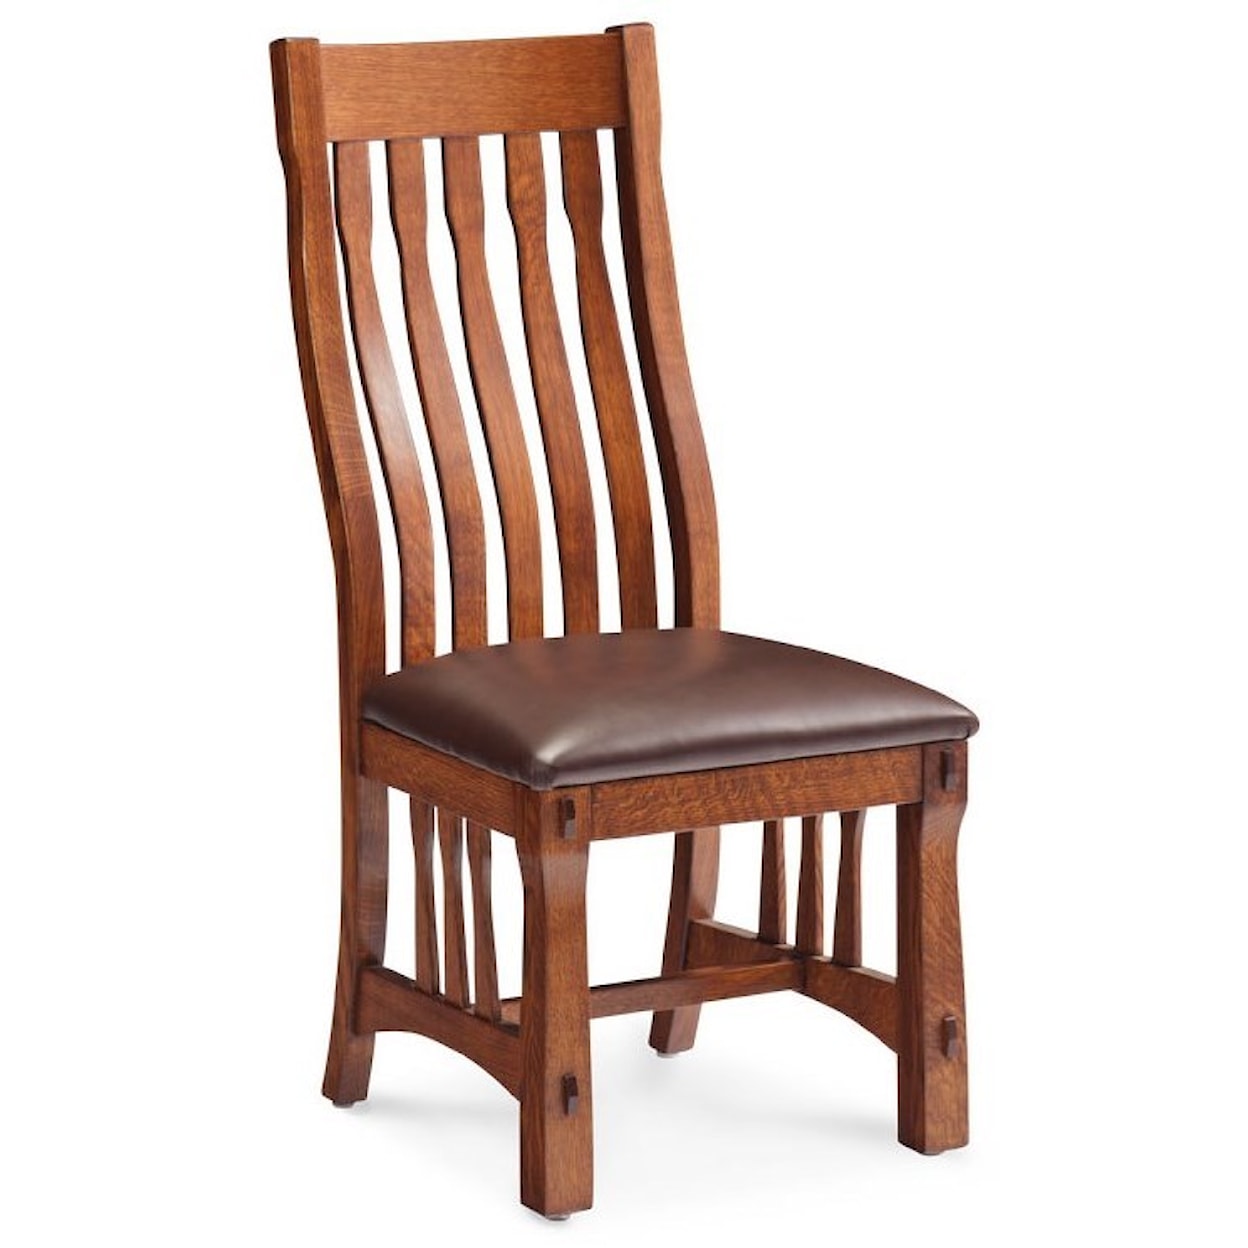 Simply Amish MaRyan Side Chair